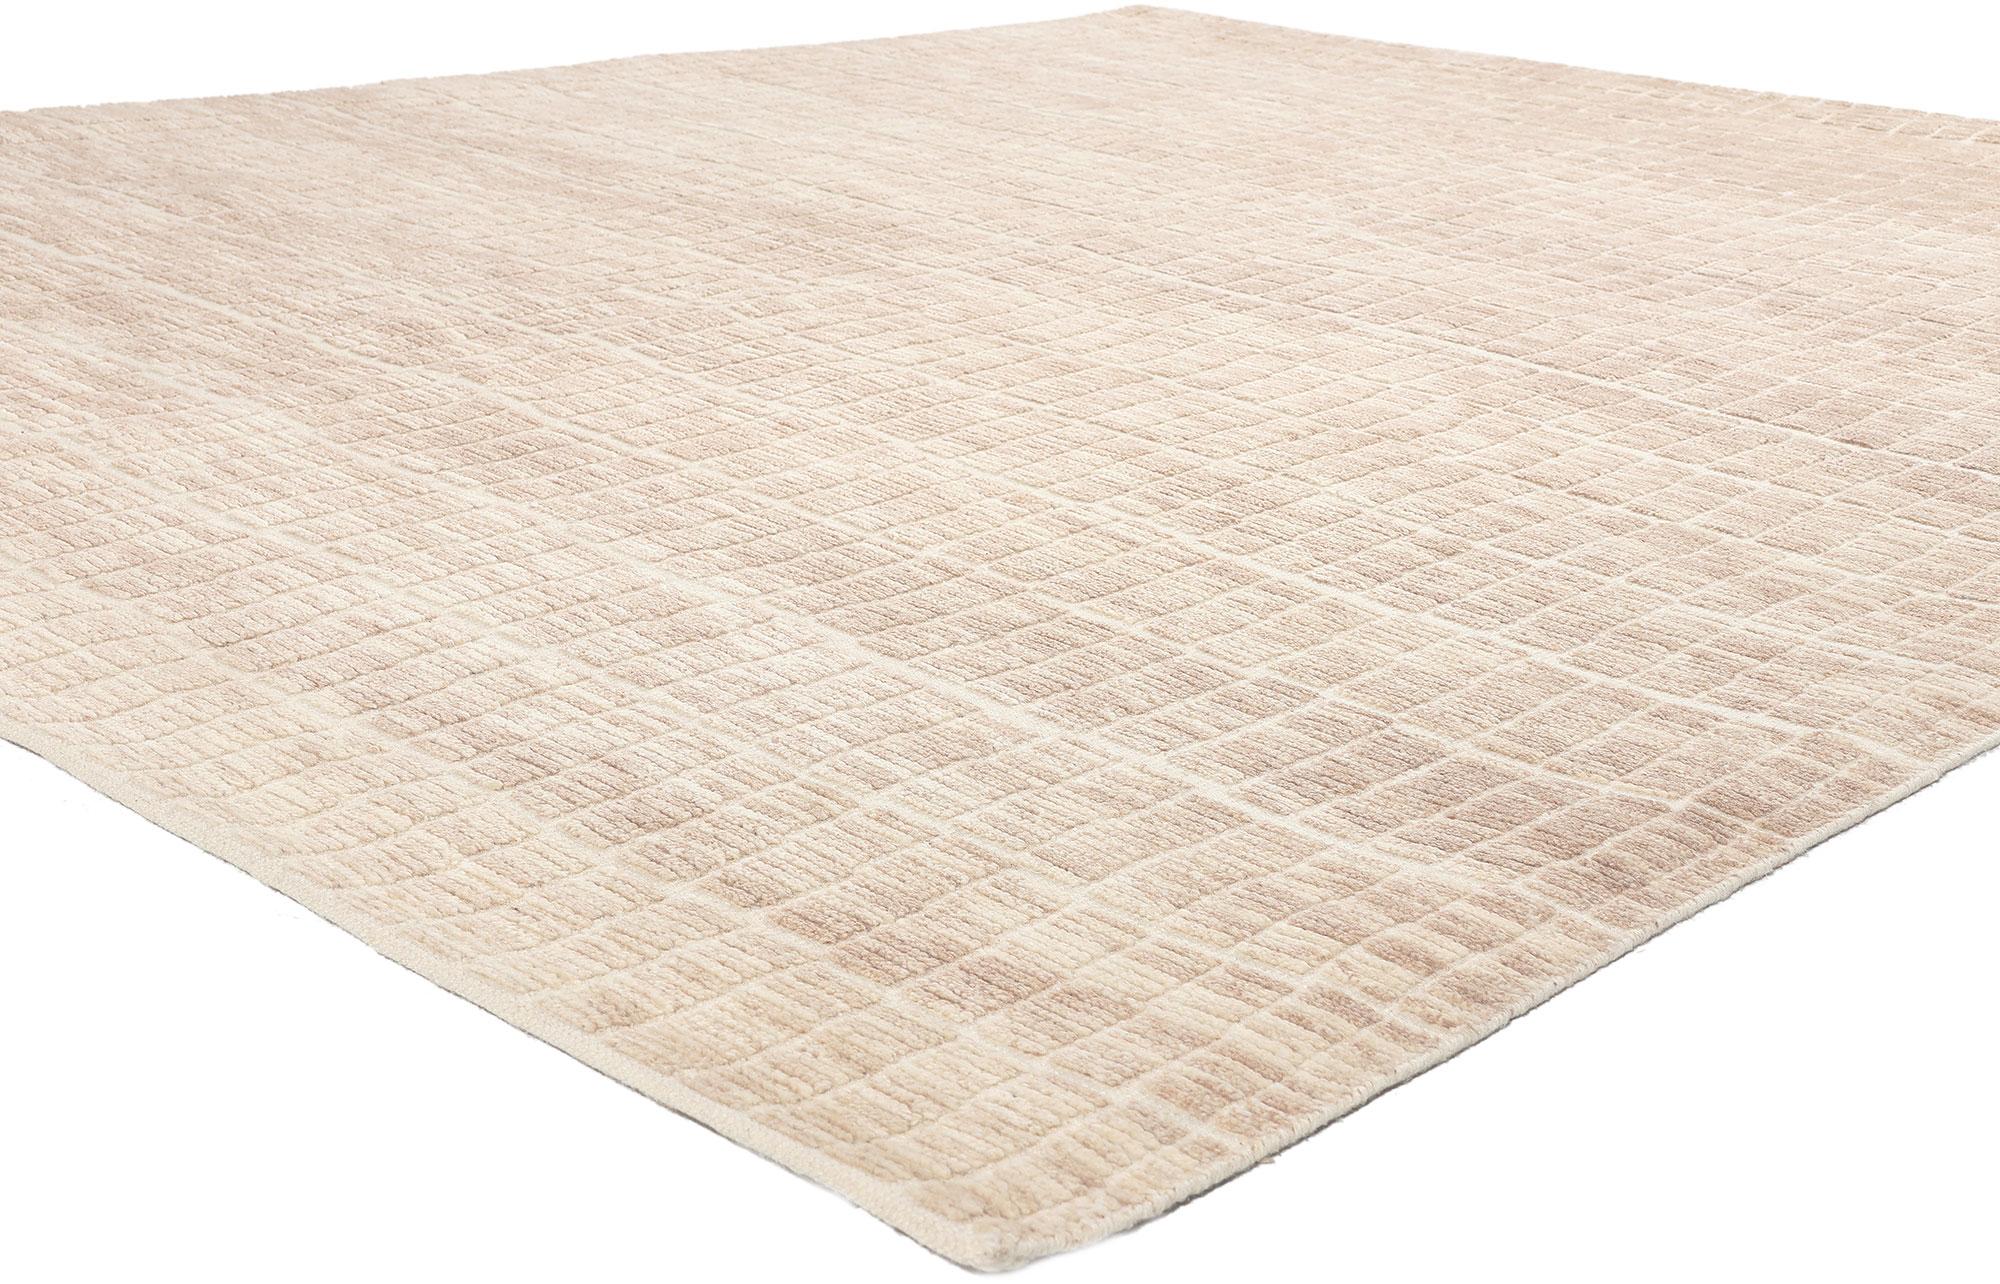 30989 Organic Modern High-Low Rug, 08'02 x 09'11.
Abstract Expressionism meets subtle Shibui in this neutral organic modern geometric high-low rug. The intrinsic geometric design and neutral earth-tone colors woven into this piece work together